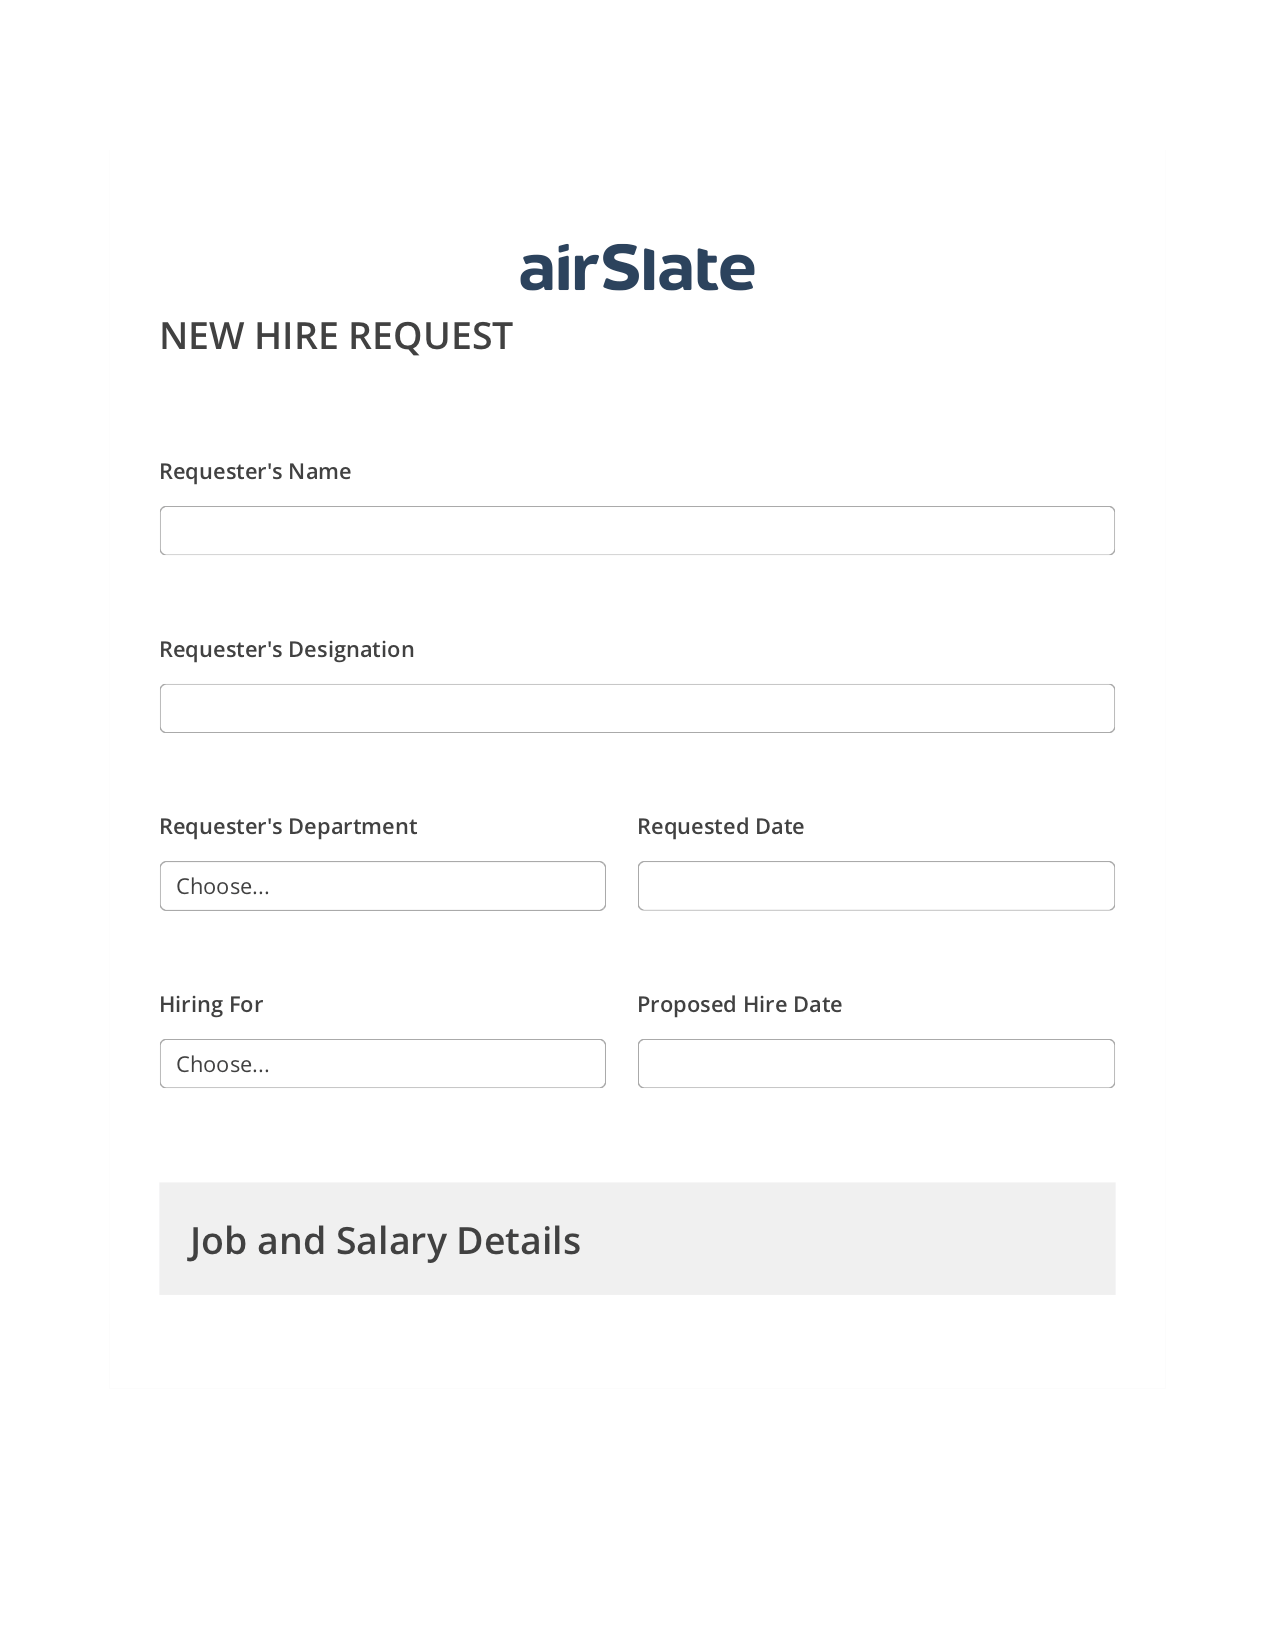 Multirole Hiring Request Workflow Pre-fill from another Slate Bot, Create slate from another Flow Bot, Export to Excel 365 Bot